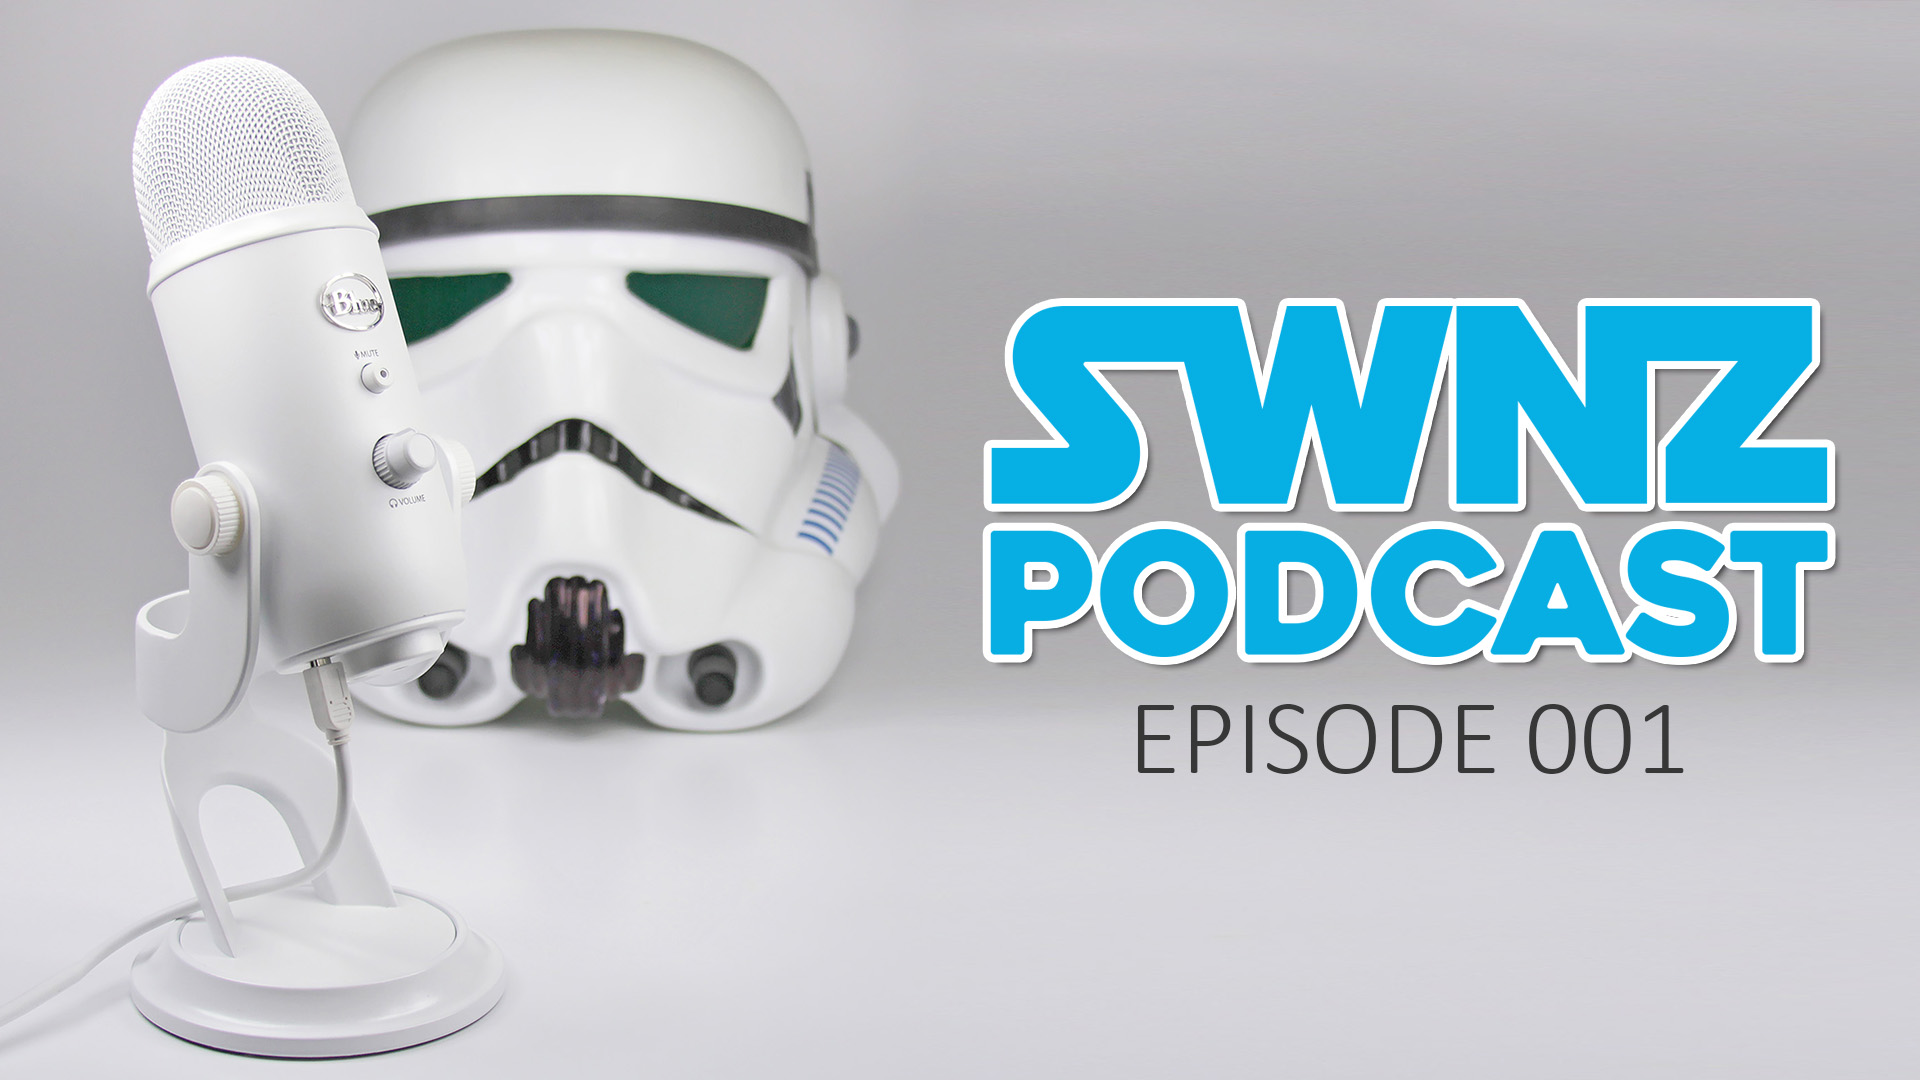 SWNZpodcast_ep001.jpg